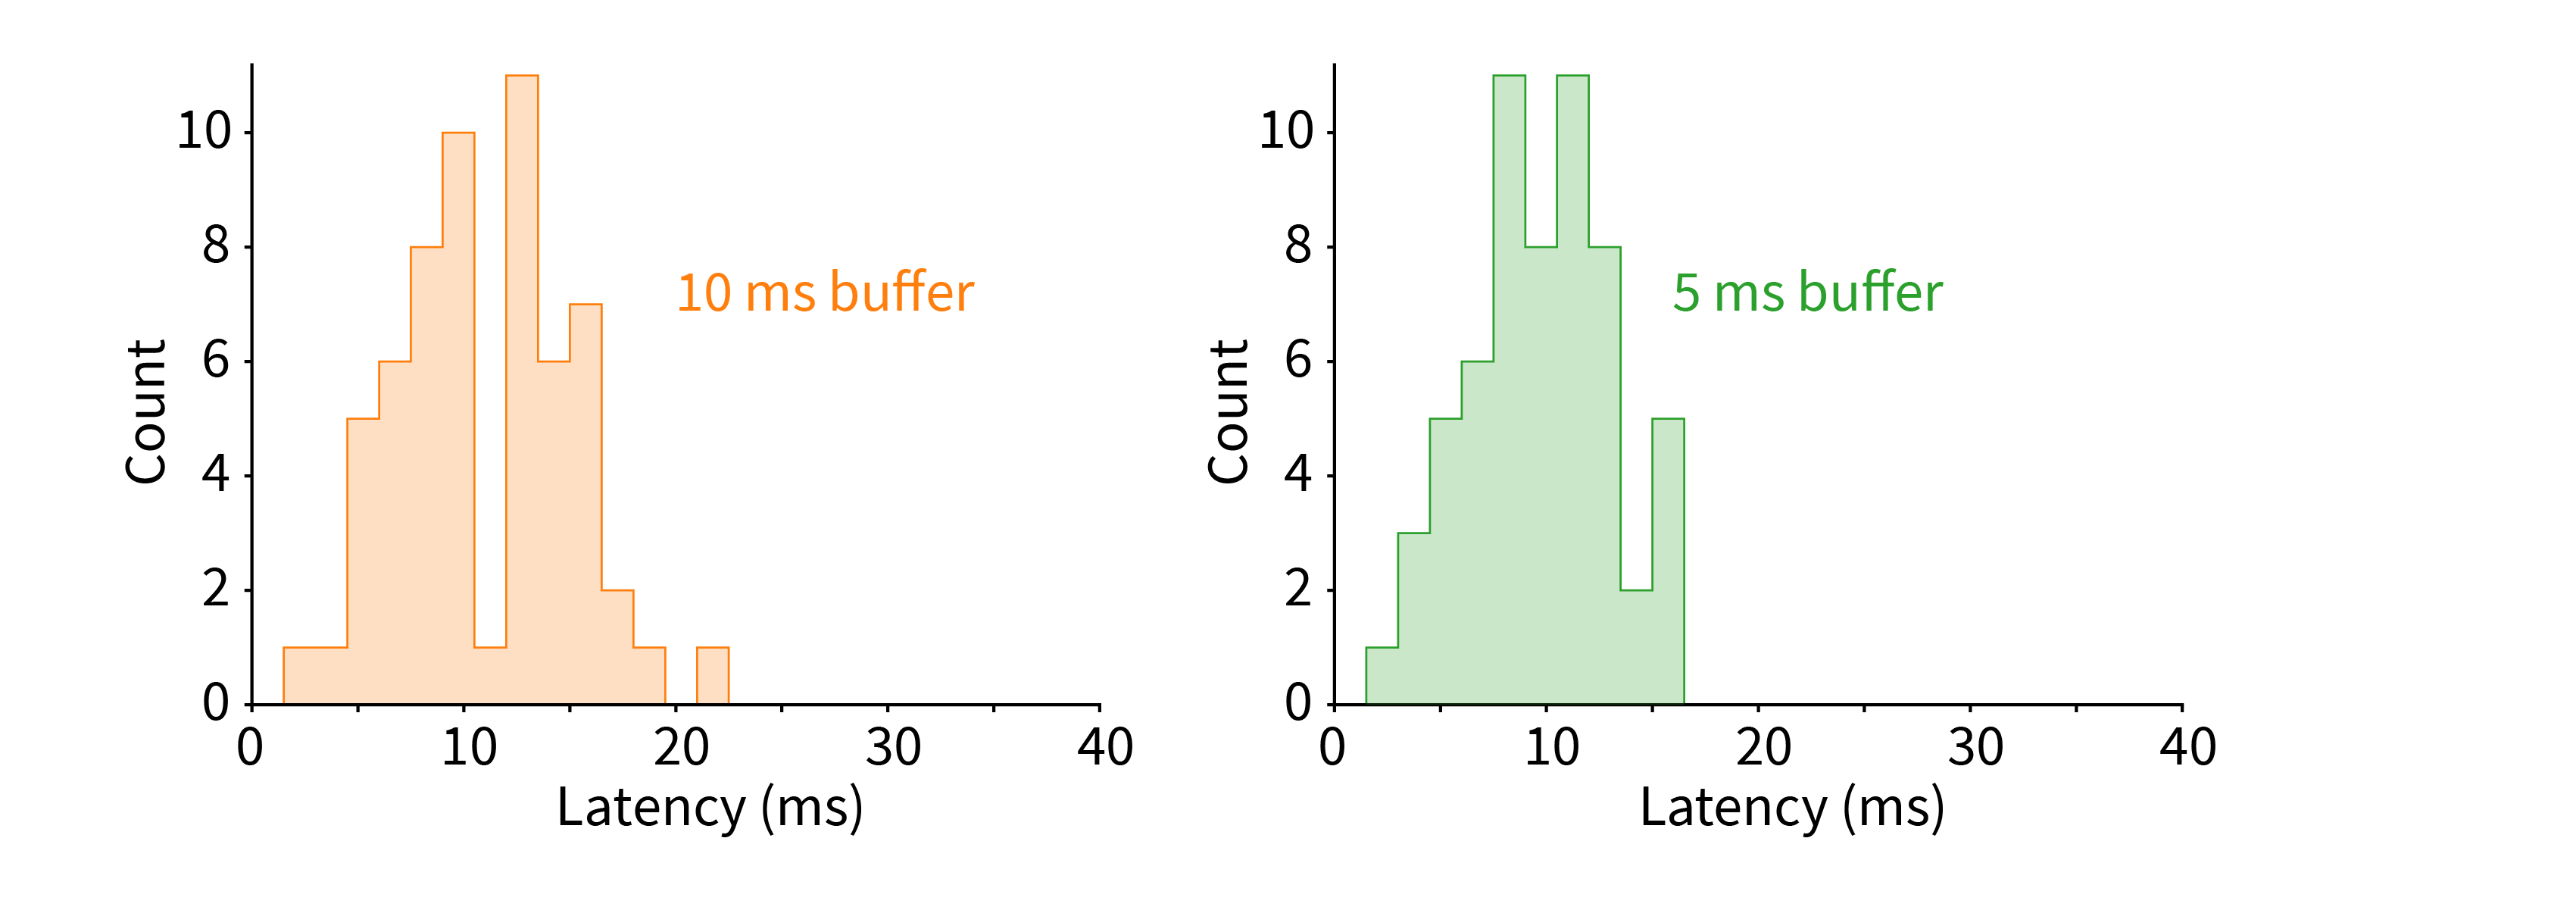 Latency histogram for 10 ms and 5 ms buffers.